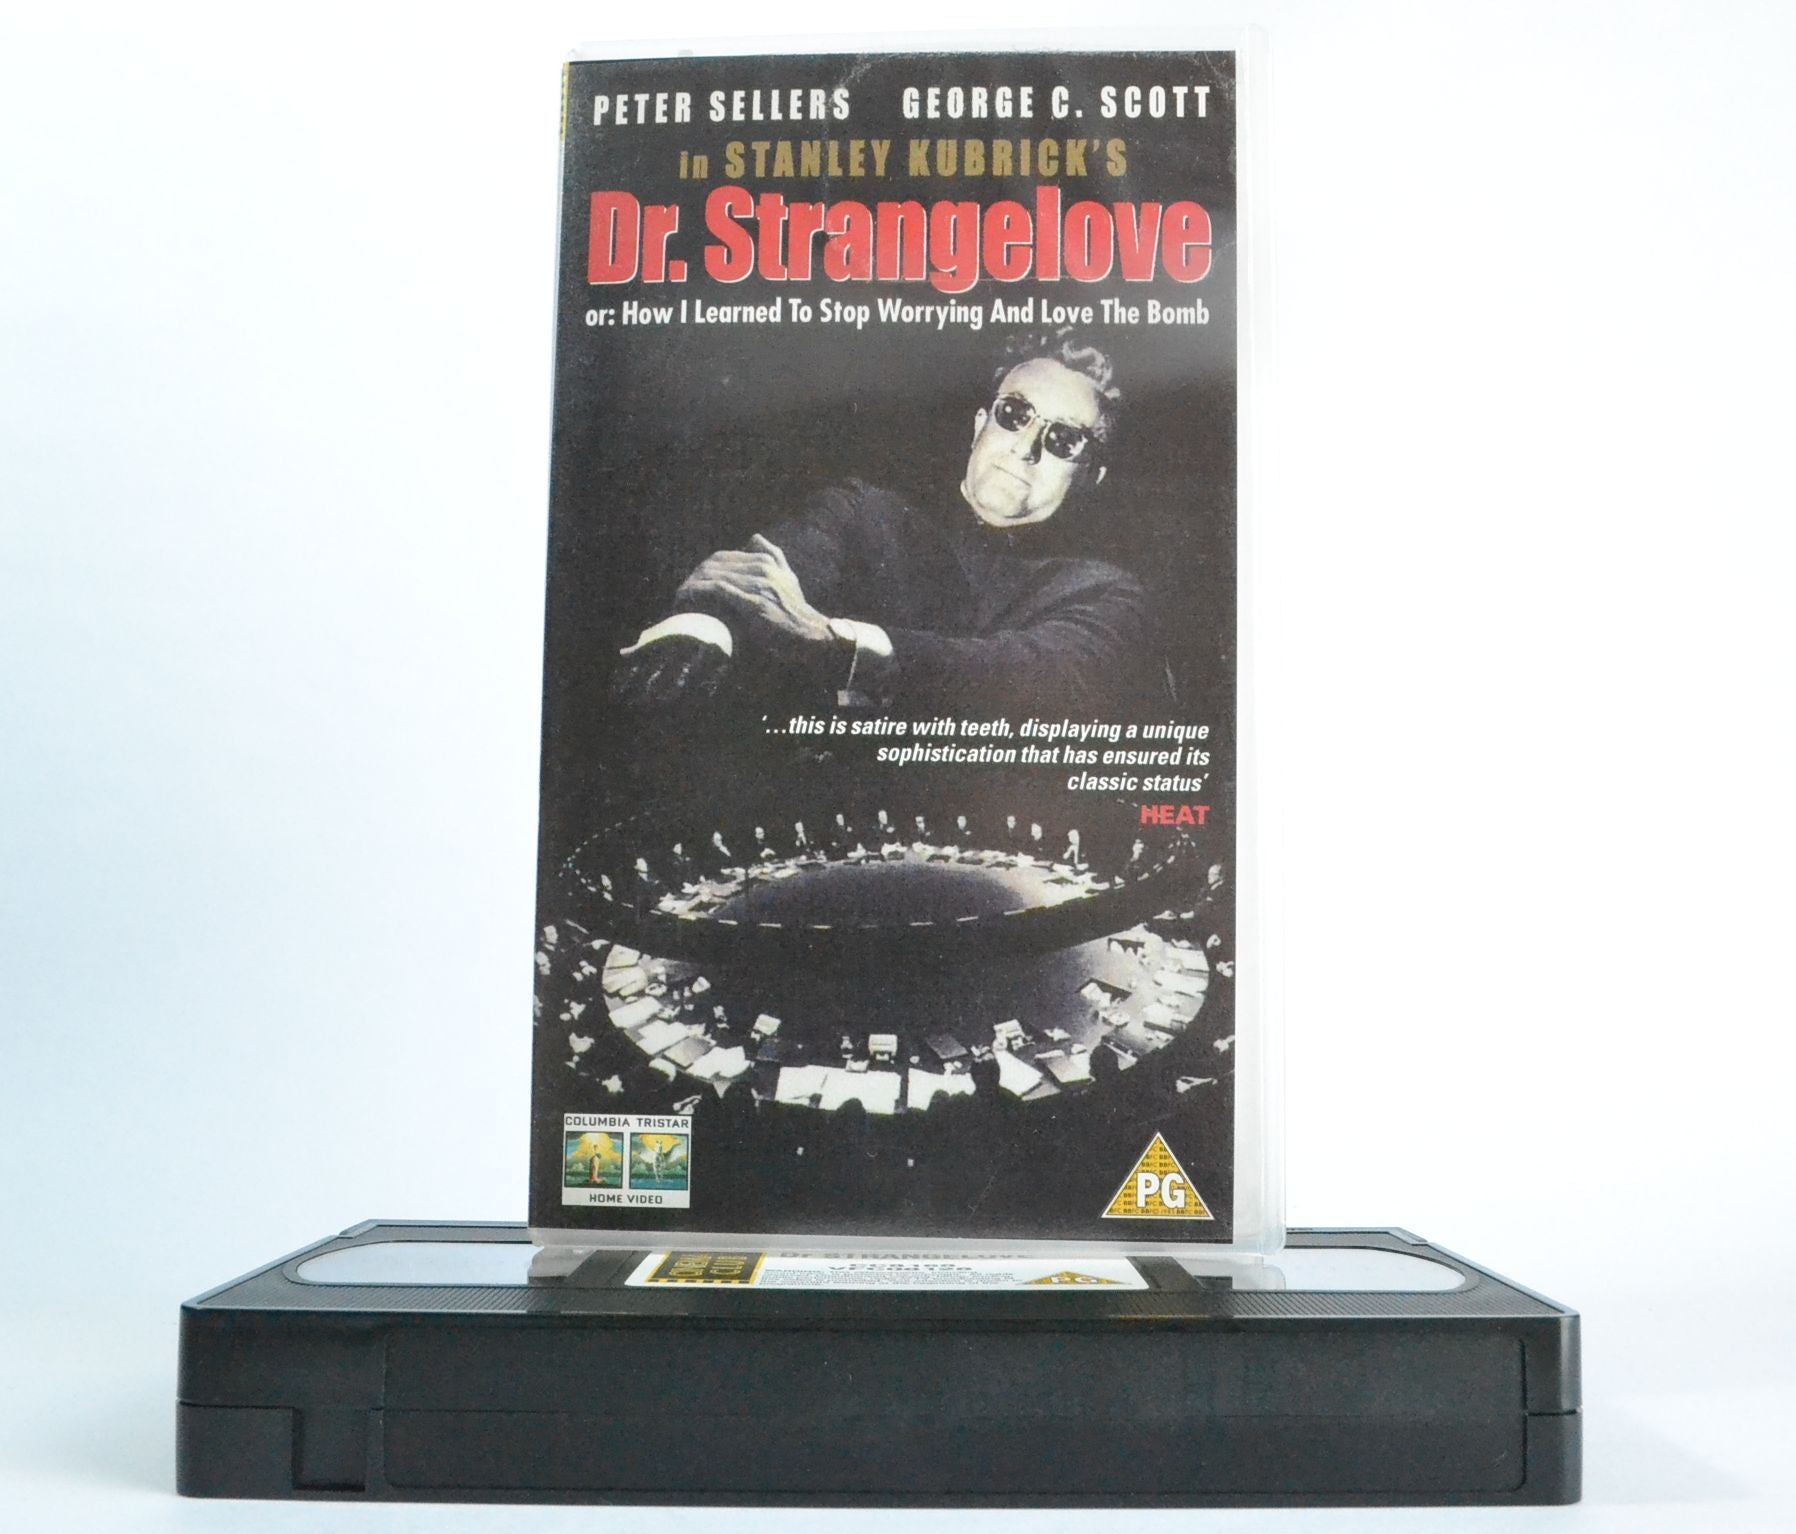 Dr. Strangelove: Stanley Kubrick (1963) Cult Classic - Peter Sellers - Comedy - VHS-